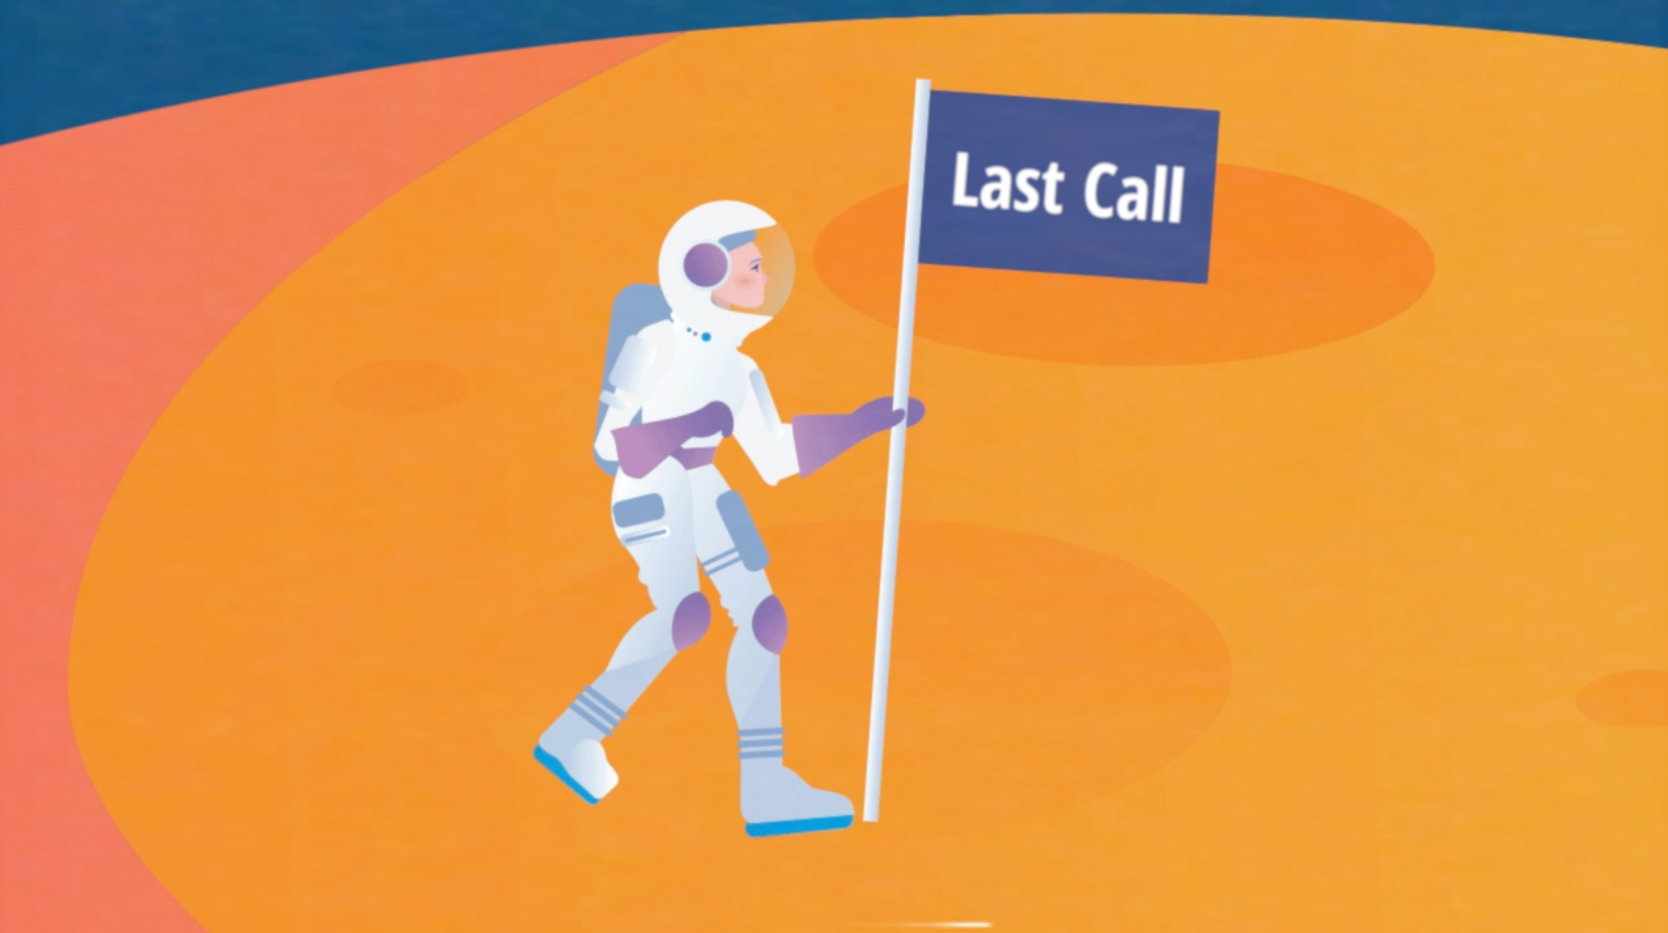 A Last Call for QUIC, a giant leap for the Internet